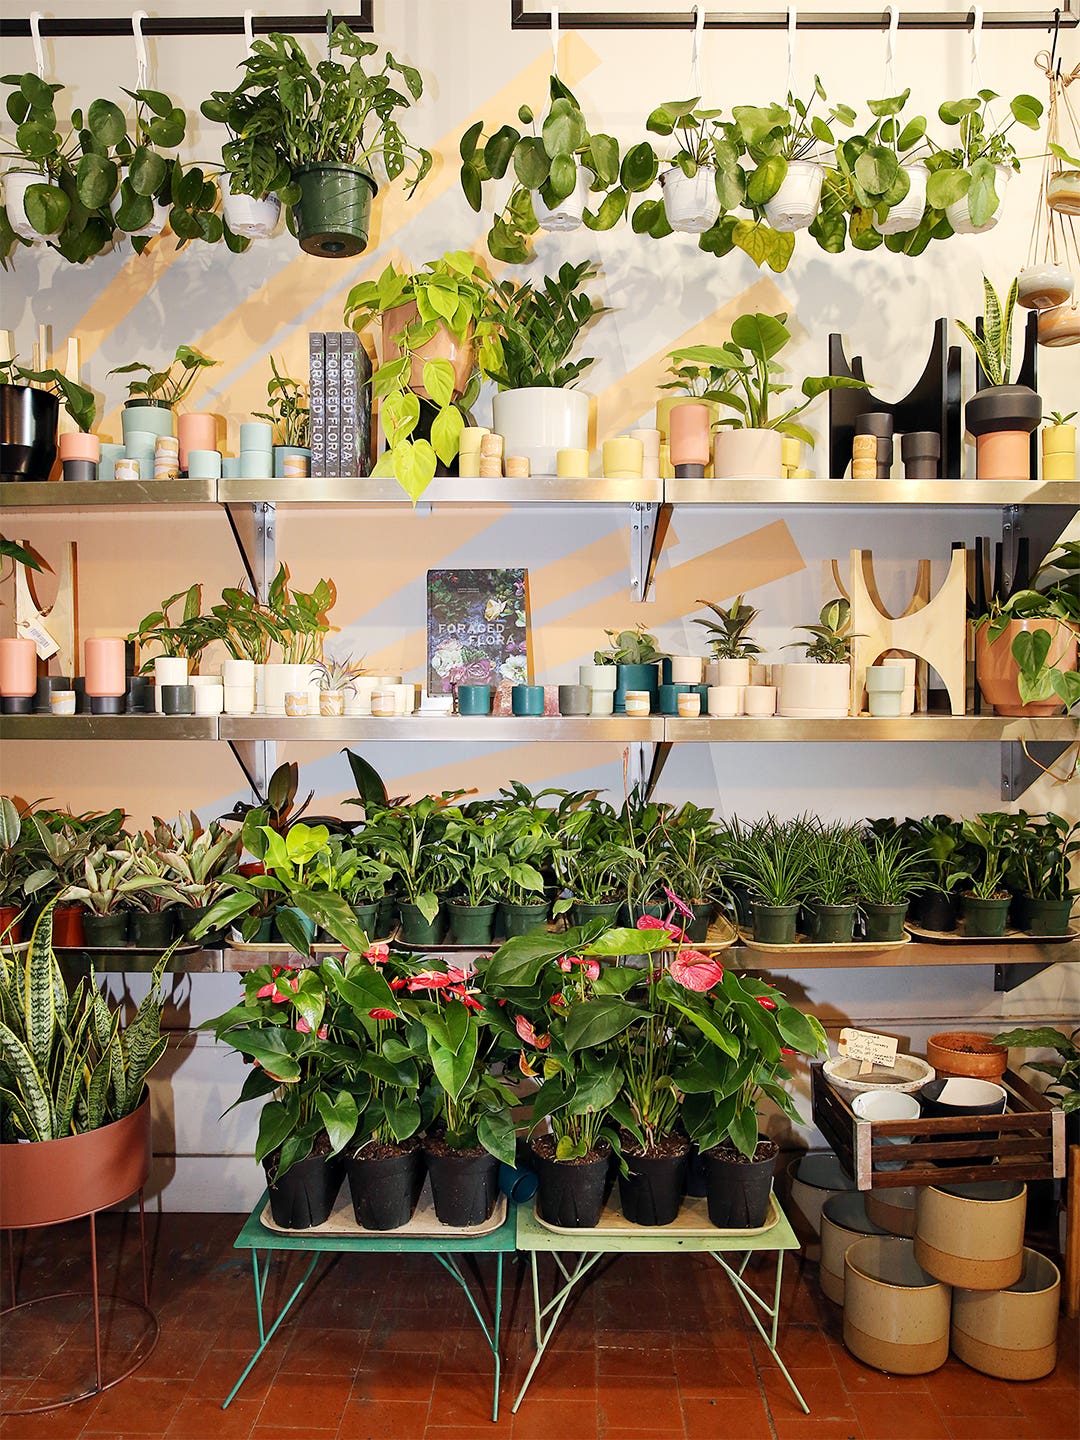 Which Houseplant You Should Buy, According to Your Zodiac Sign